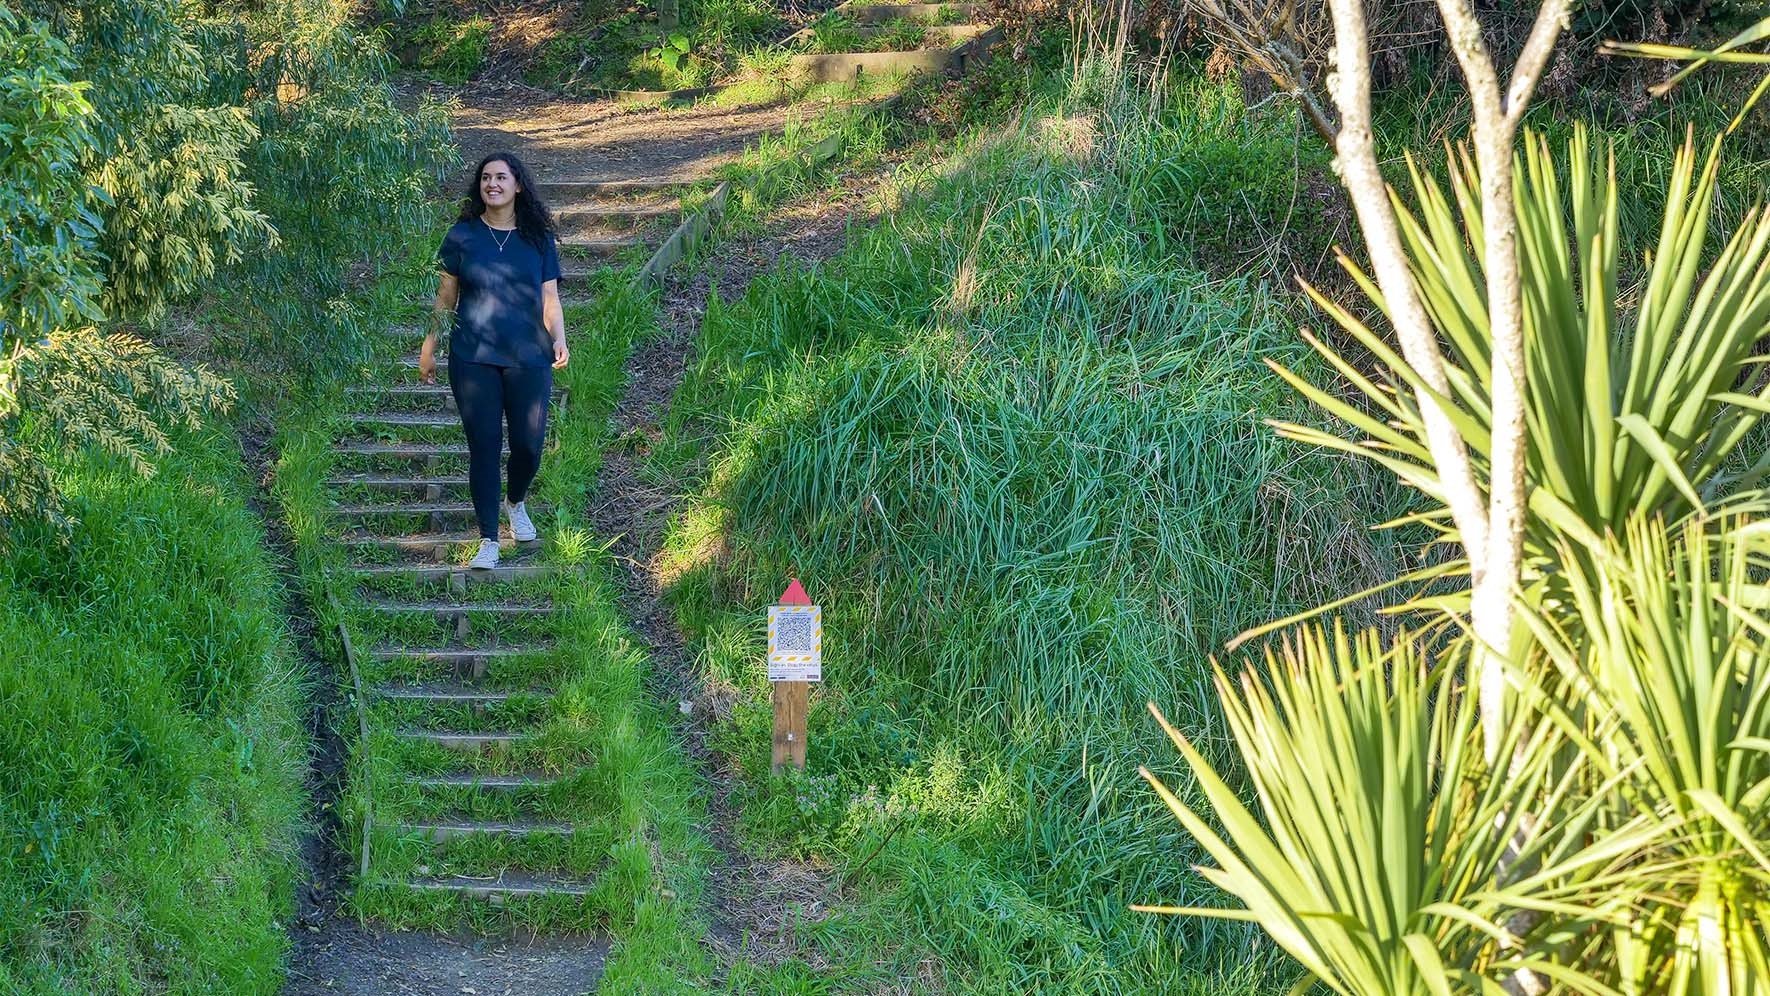 Young woman walking down steps cut into the side of a hill, with native bush on either side.